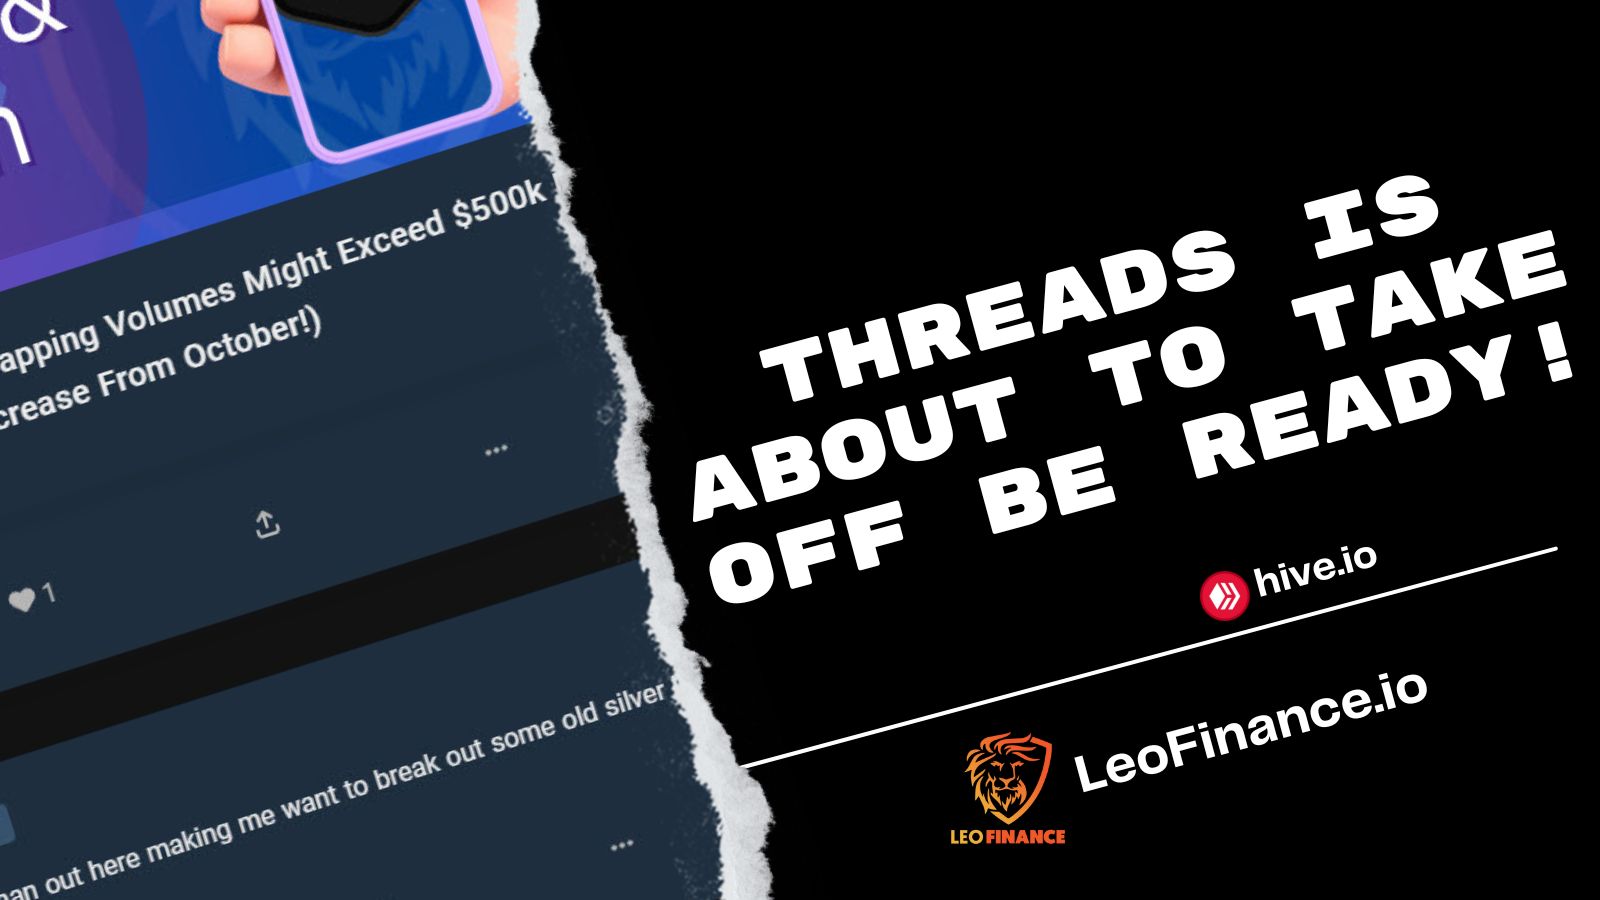 @bitcoinflood/threads-is-about-to-take-off-be-ready